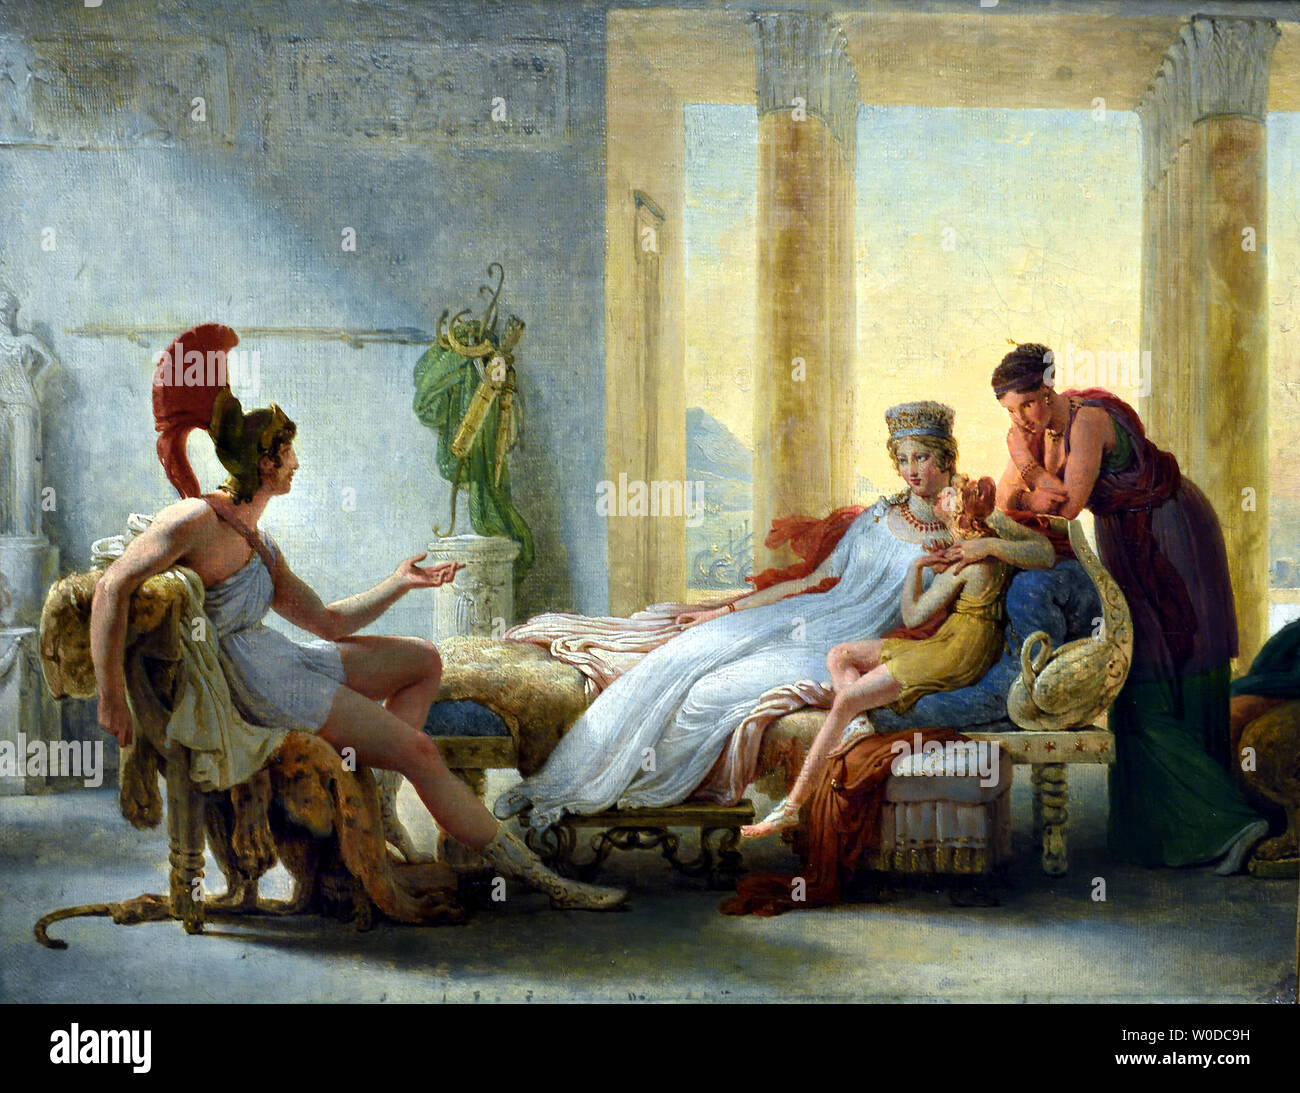 Enee et Didon - Dido and Aeneas 1815 by Pierre Narcisse, baron Guerin  1774 -1833 France French ( Aeneas telling Dido the misfortunes of the city of Troy 1815 ) Stock Photo